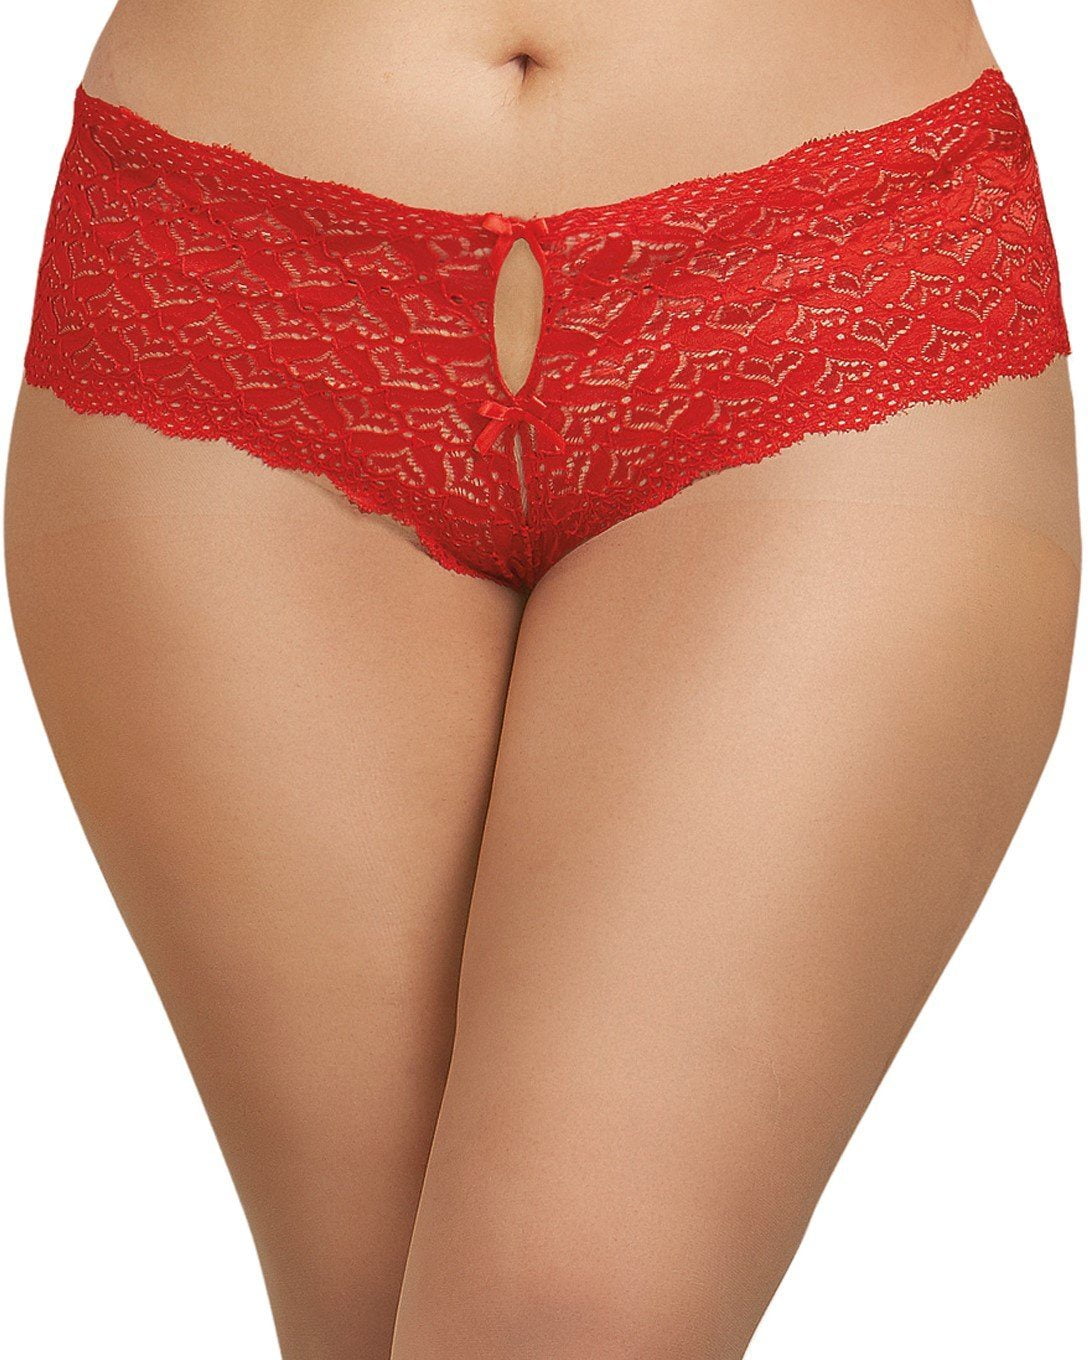 Dreamgirl Women's Lace Lingerie Panty with Heart Cutout Back